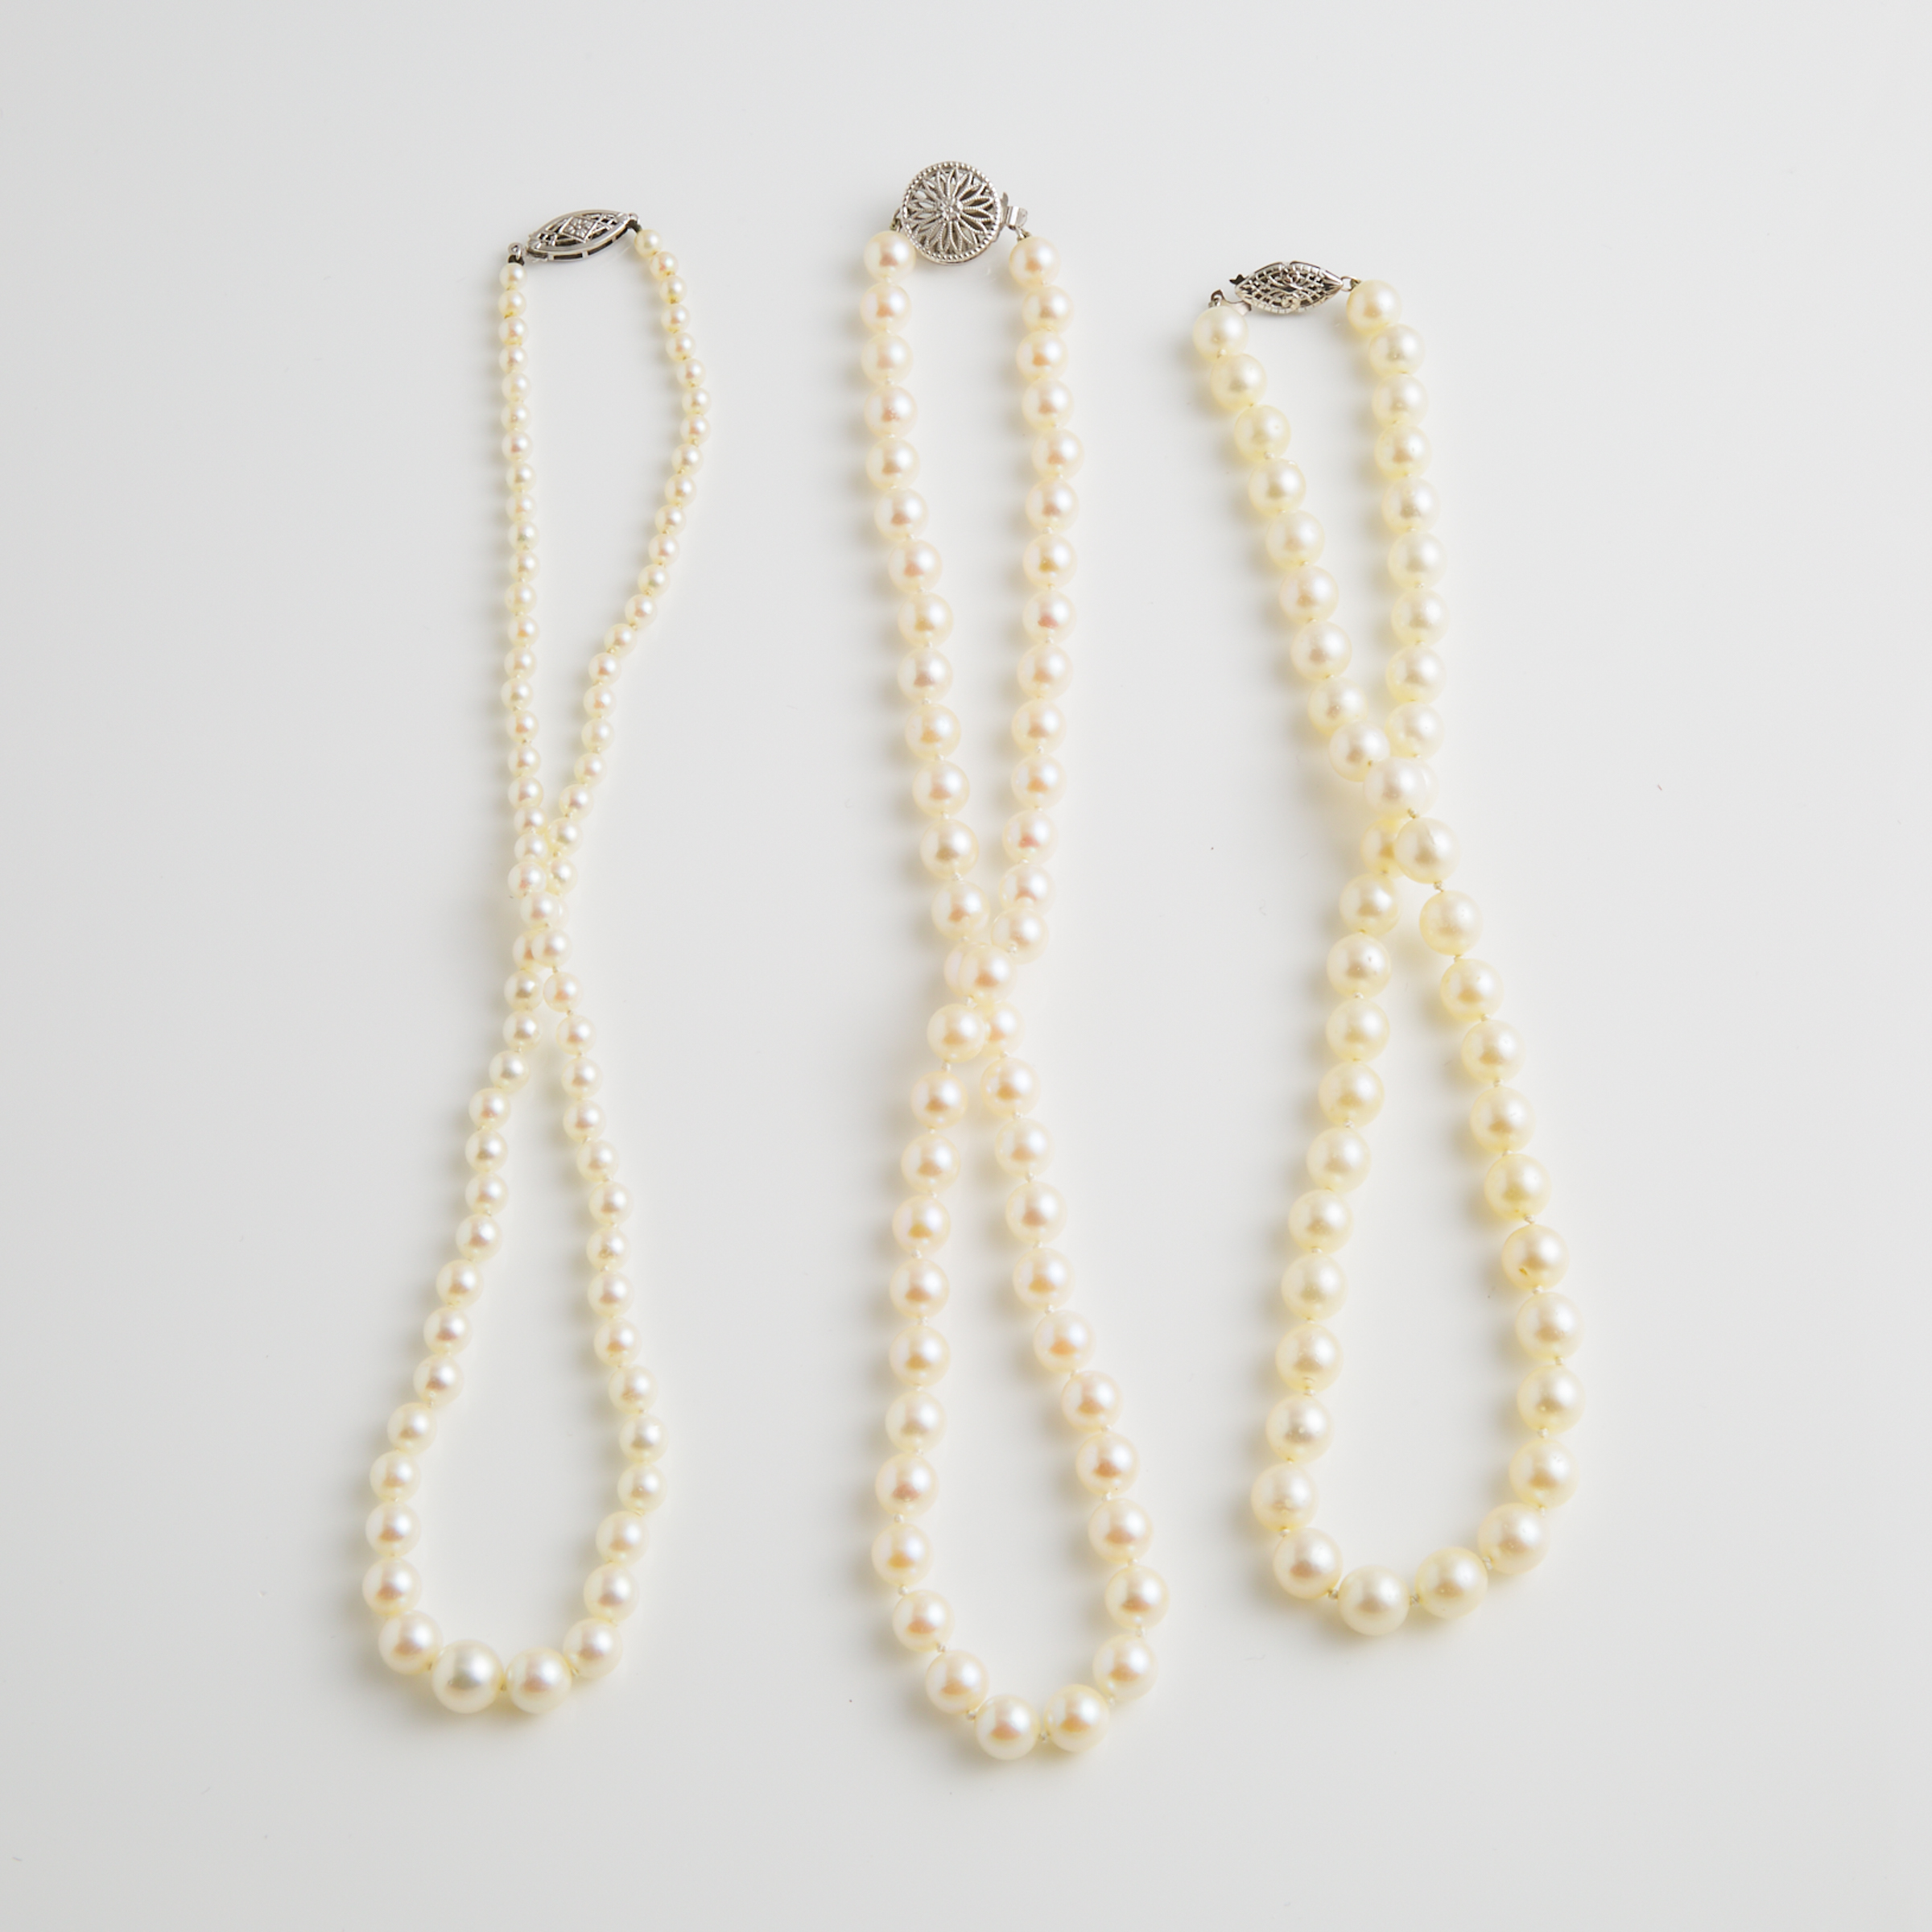 Three Single Strand Cultured Pearl Necklaces